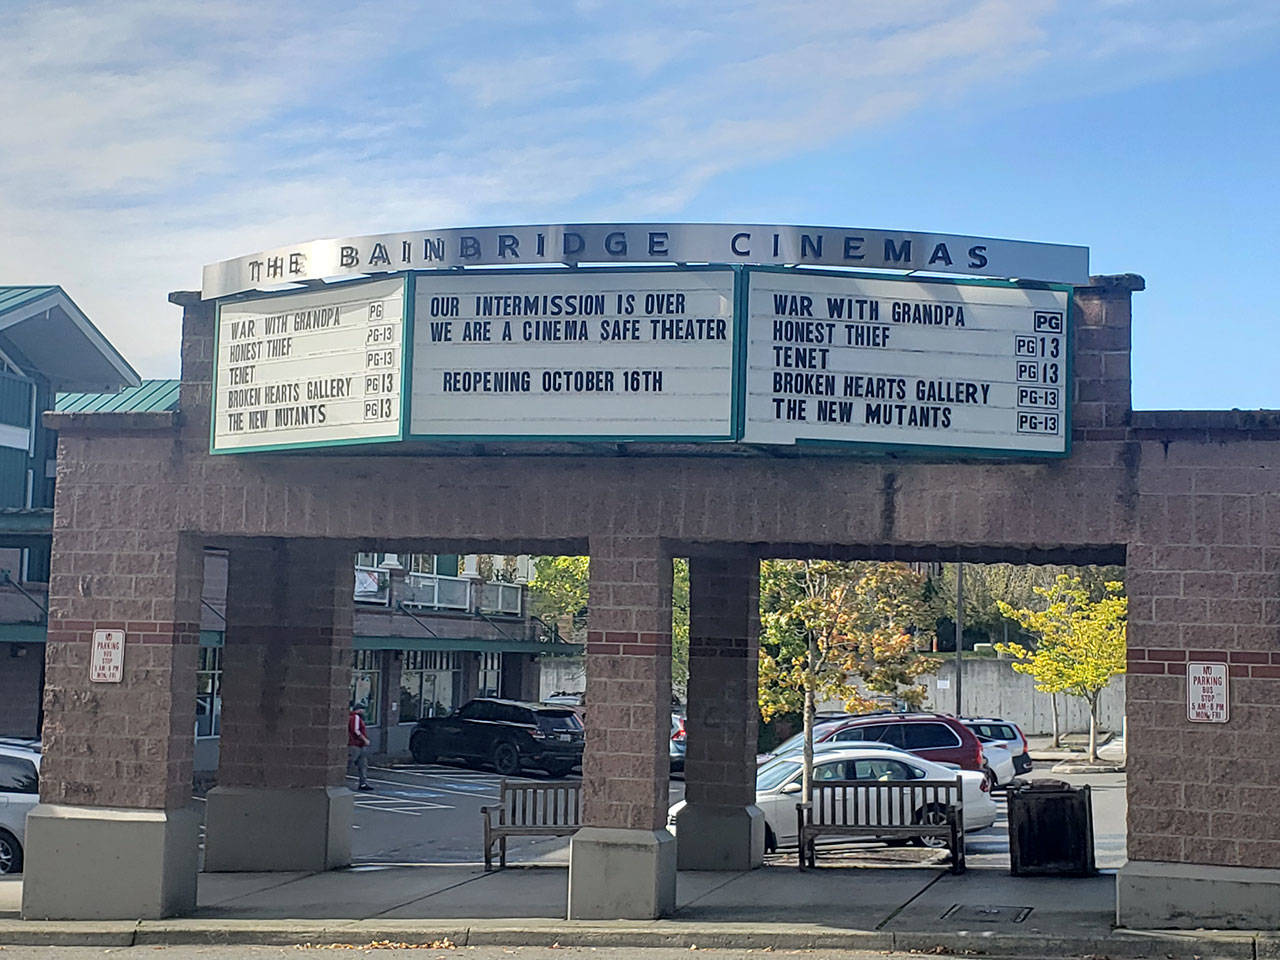 Bainbridge Cinemas will be reopening at 25 percent capacity Friday after being closed for over seven months due to the COVID-19 pandemic. Tyler Shuey/Bainbridge Island Review